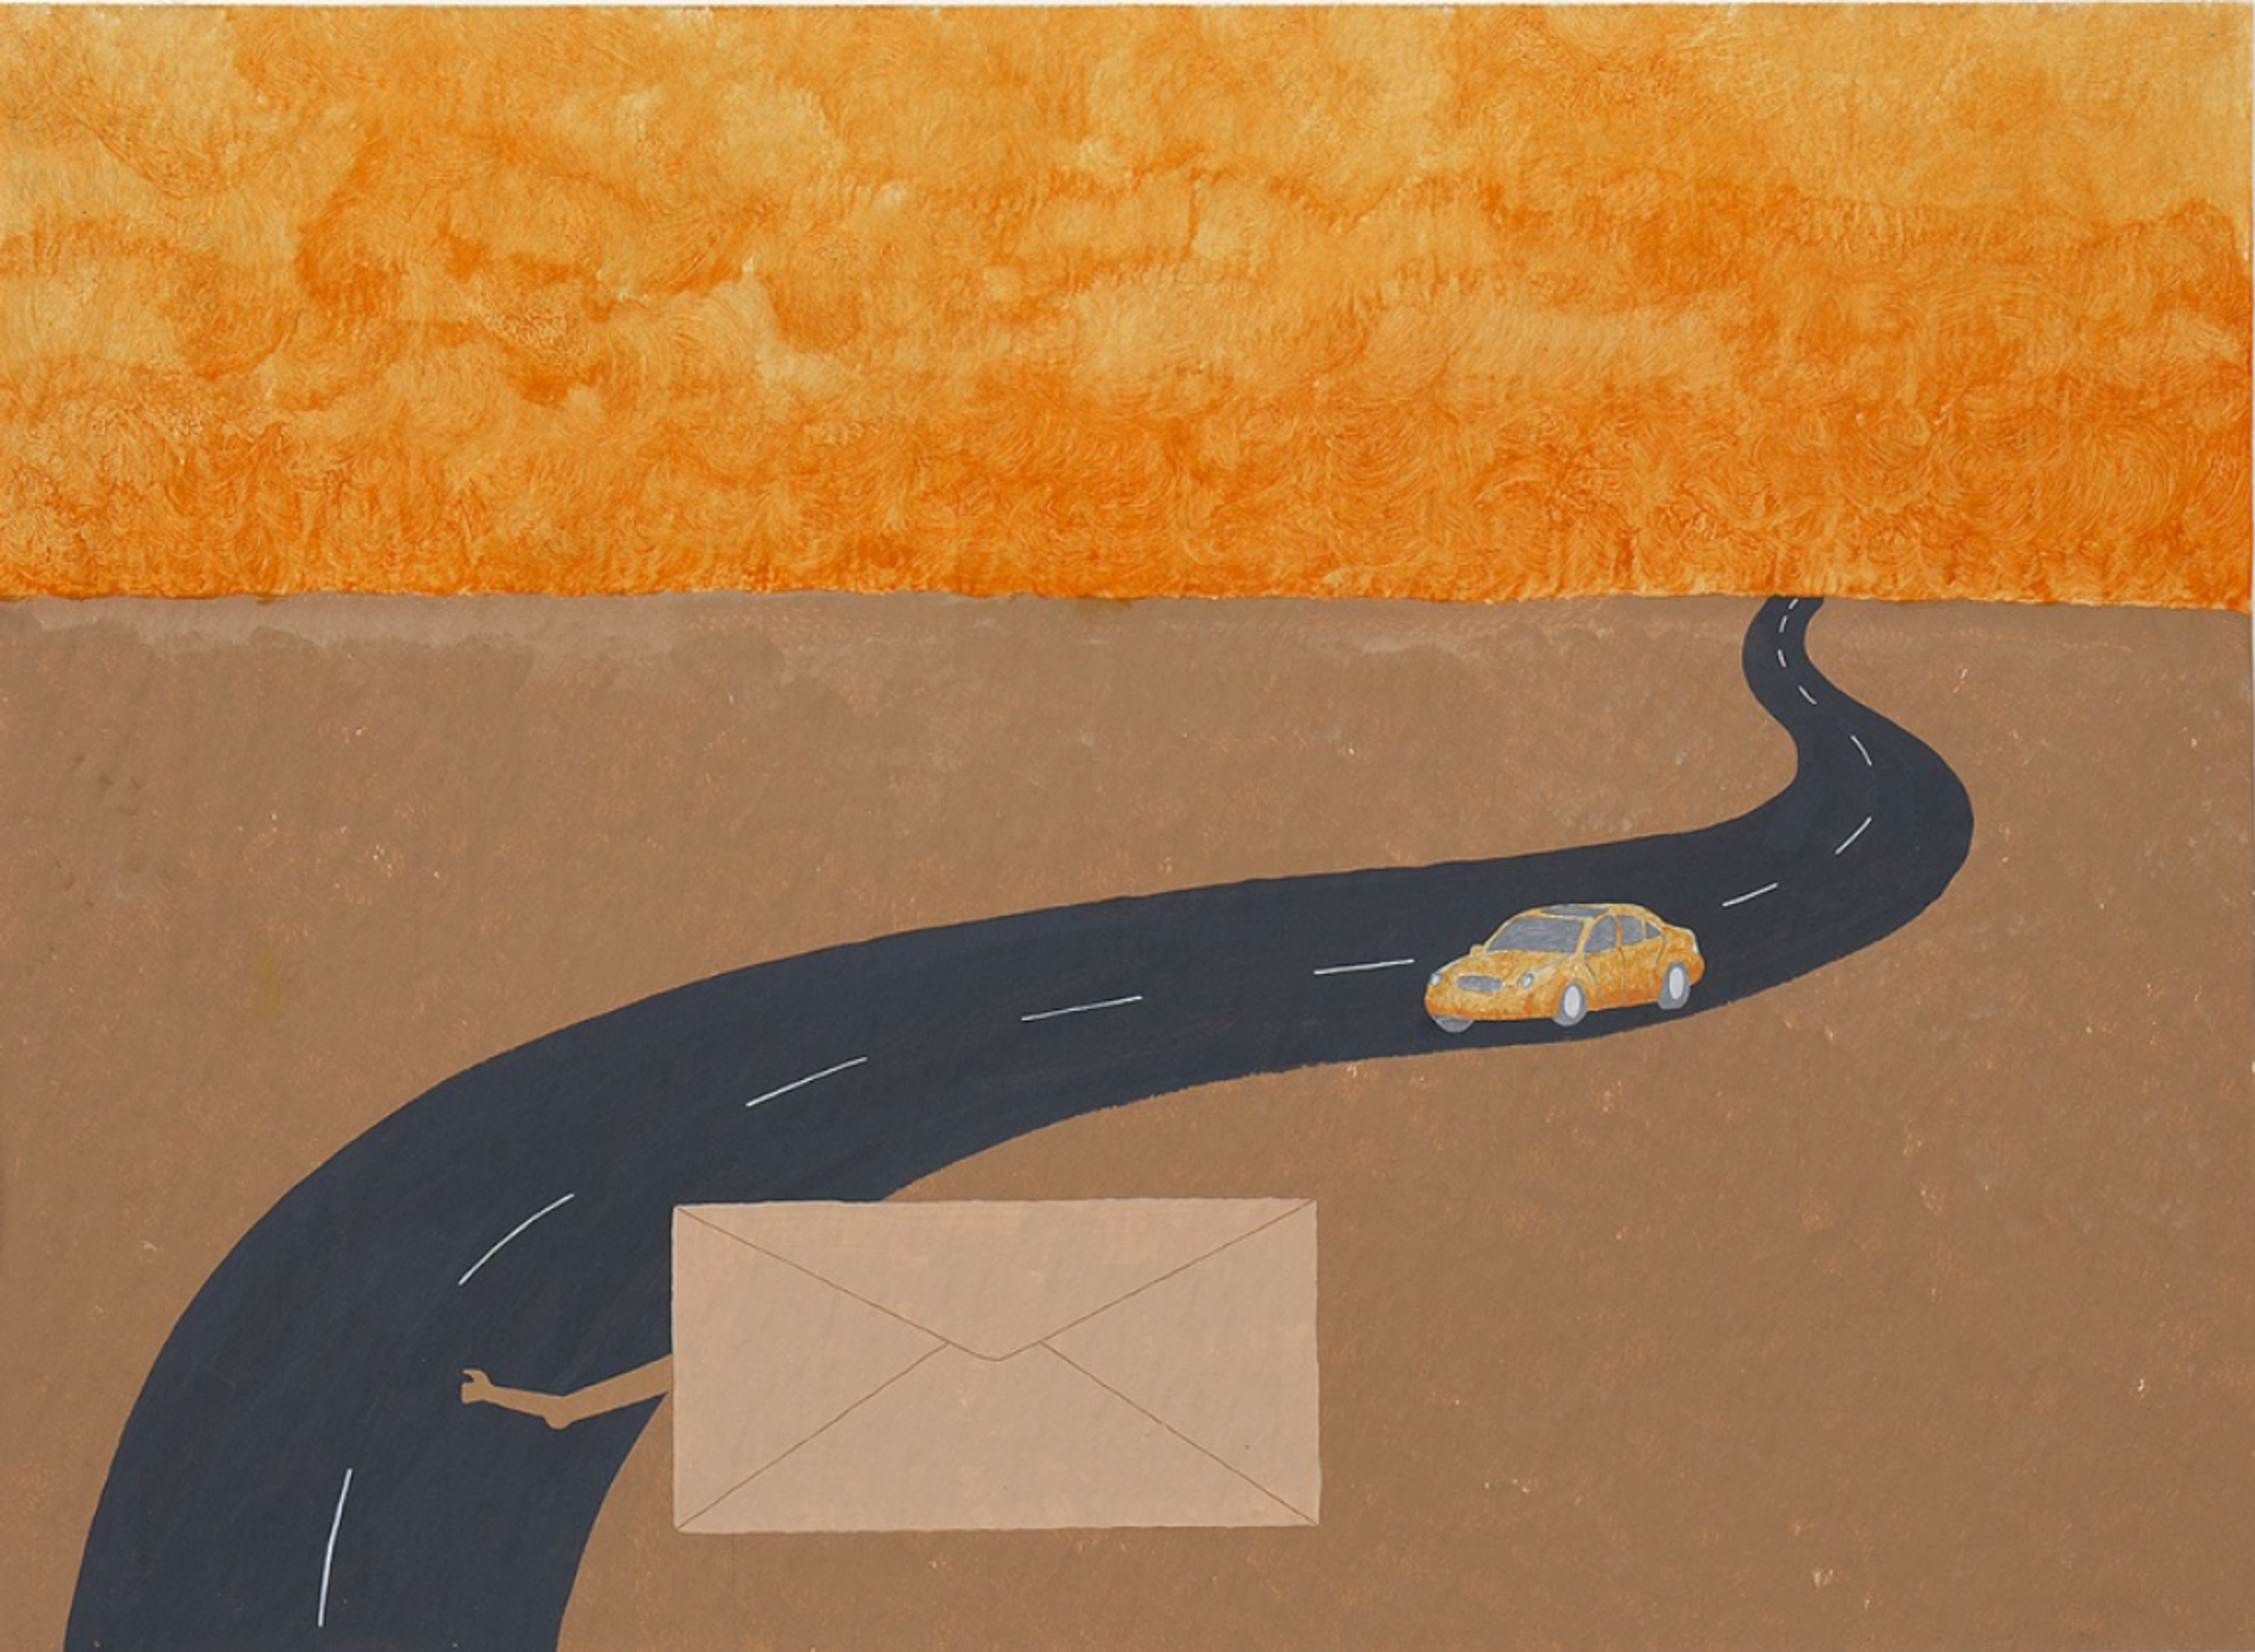 Painitng of a minimalist landscape with orange sky and road leading from the horizon line to the forground with a naively painted car approaching an envelope with outstretched arm with thumb extended as a hitch hiker would